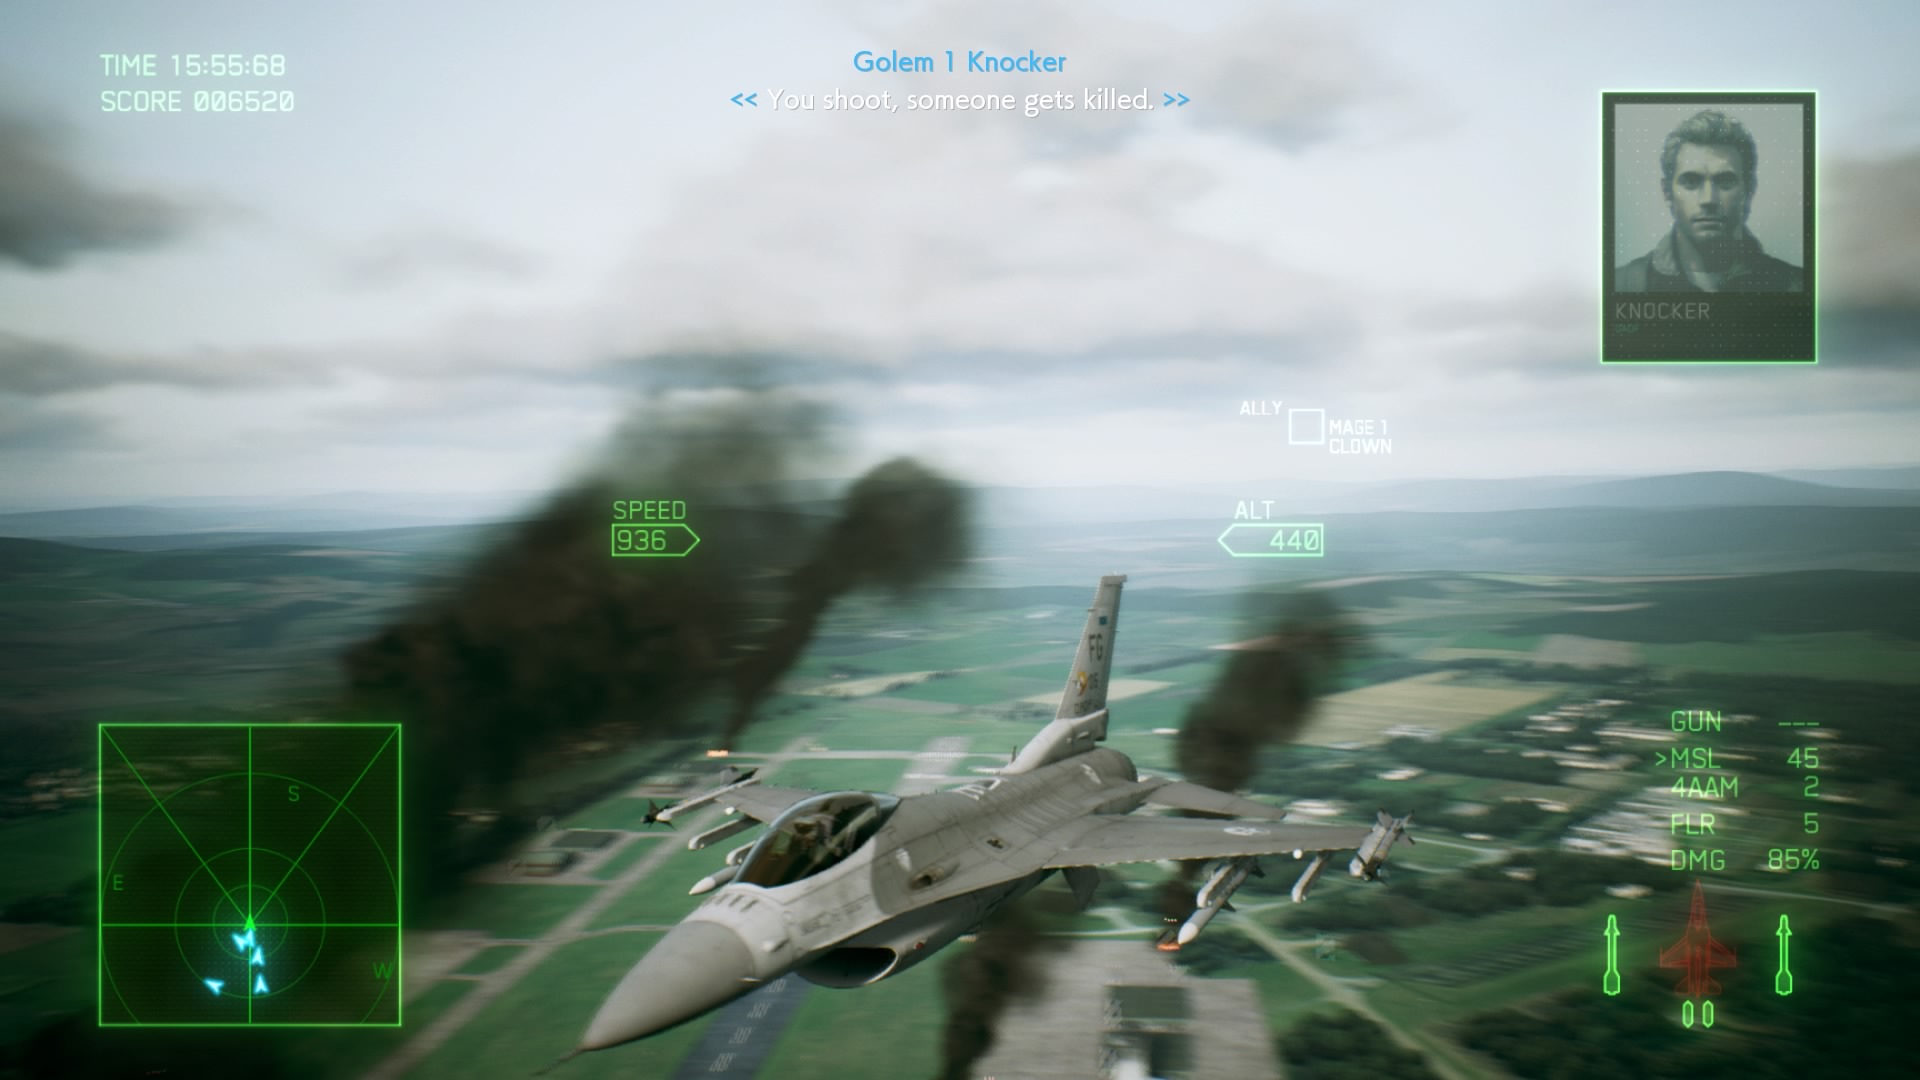 Ace Combat 7 Skies Unknown Review: Take to the skies